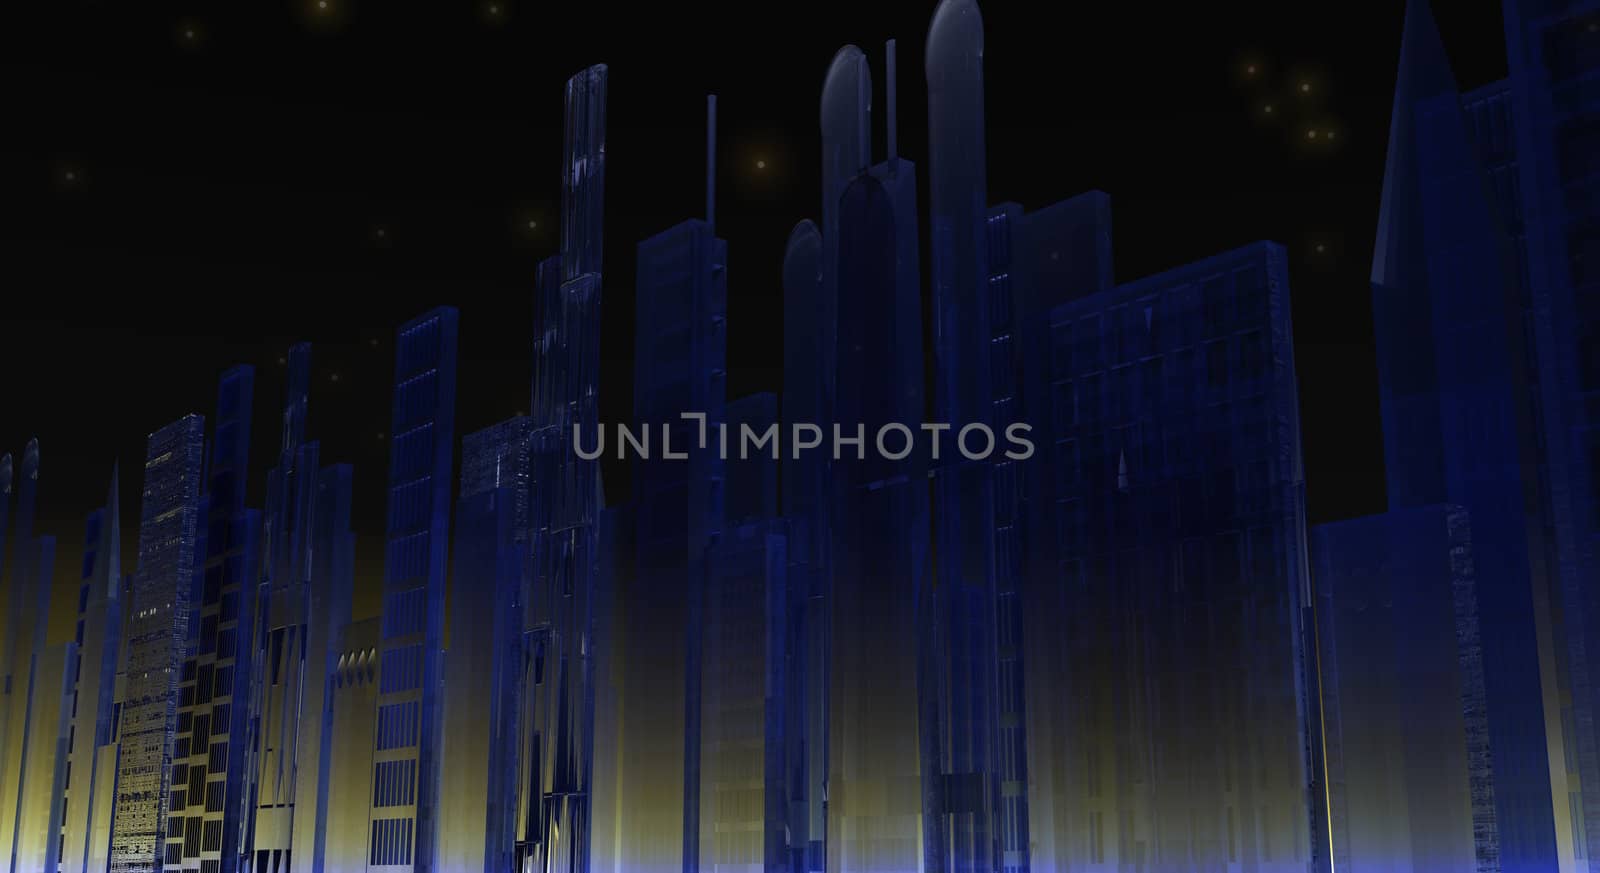 An illustration of a cityscape at night with light shining from the streets.